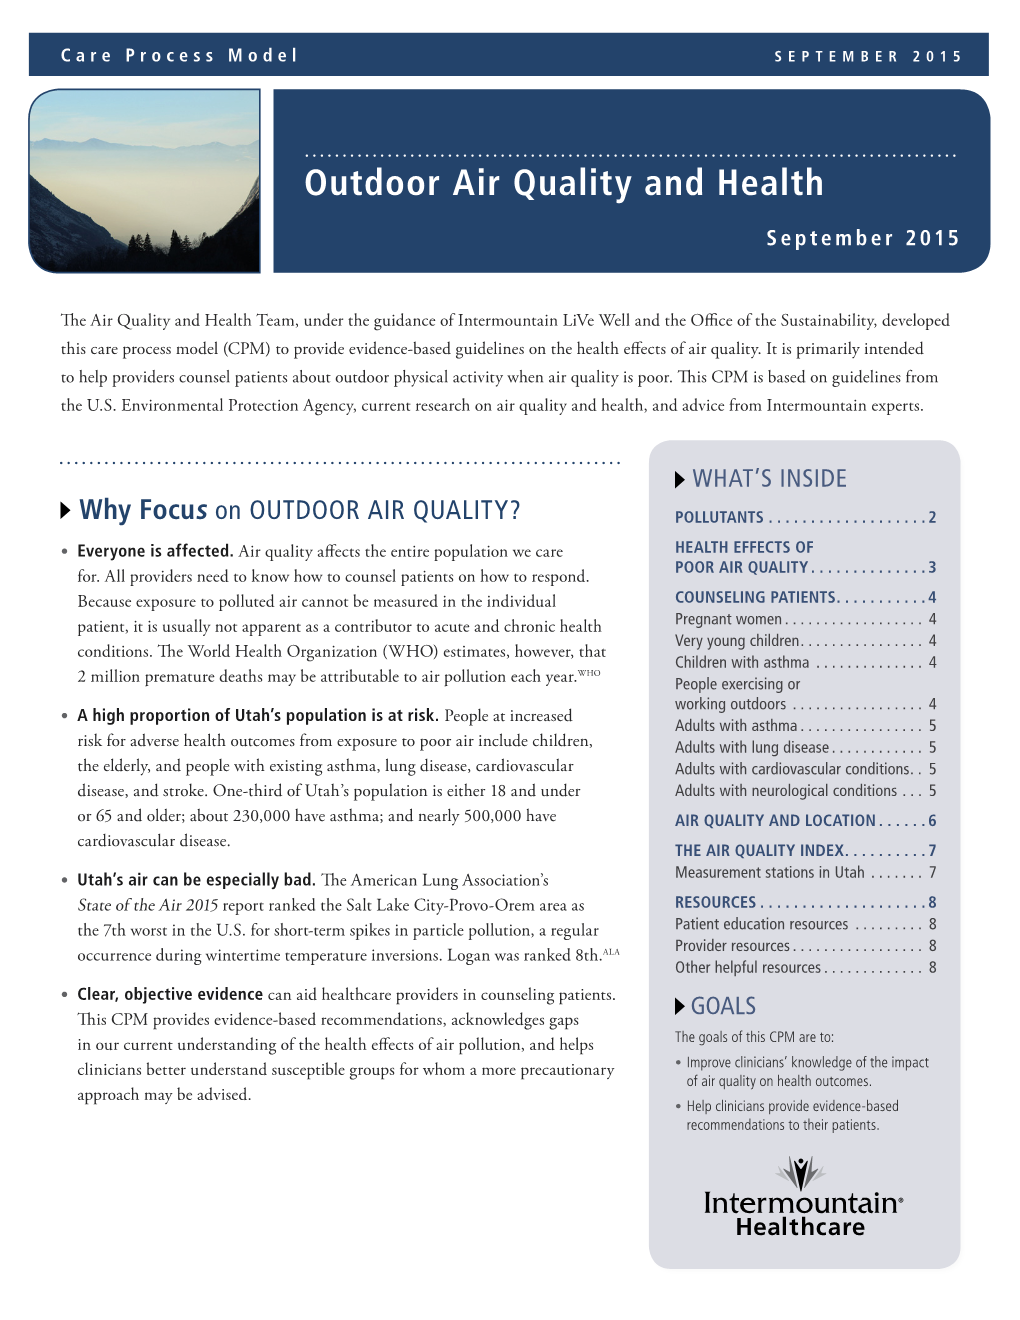 Outdoor Air Quality and Health